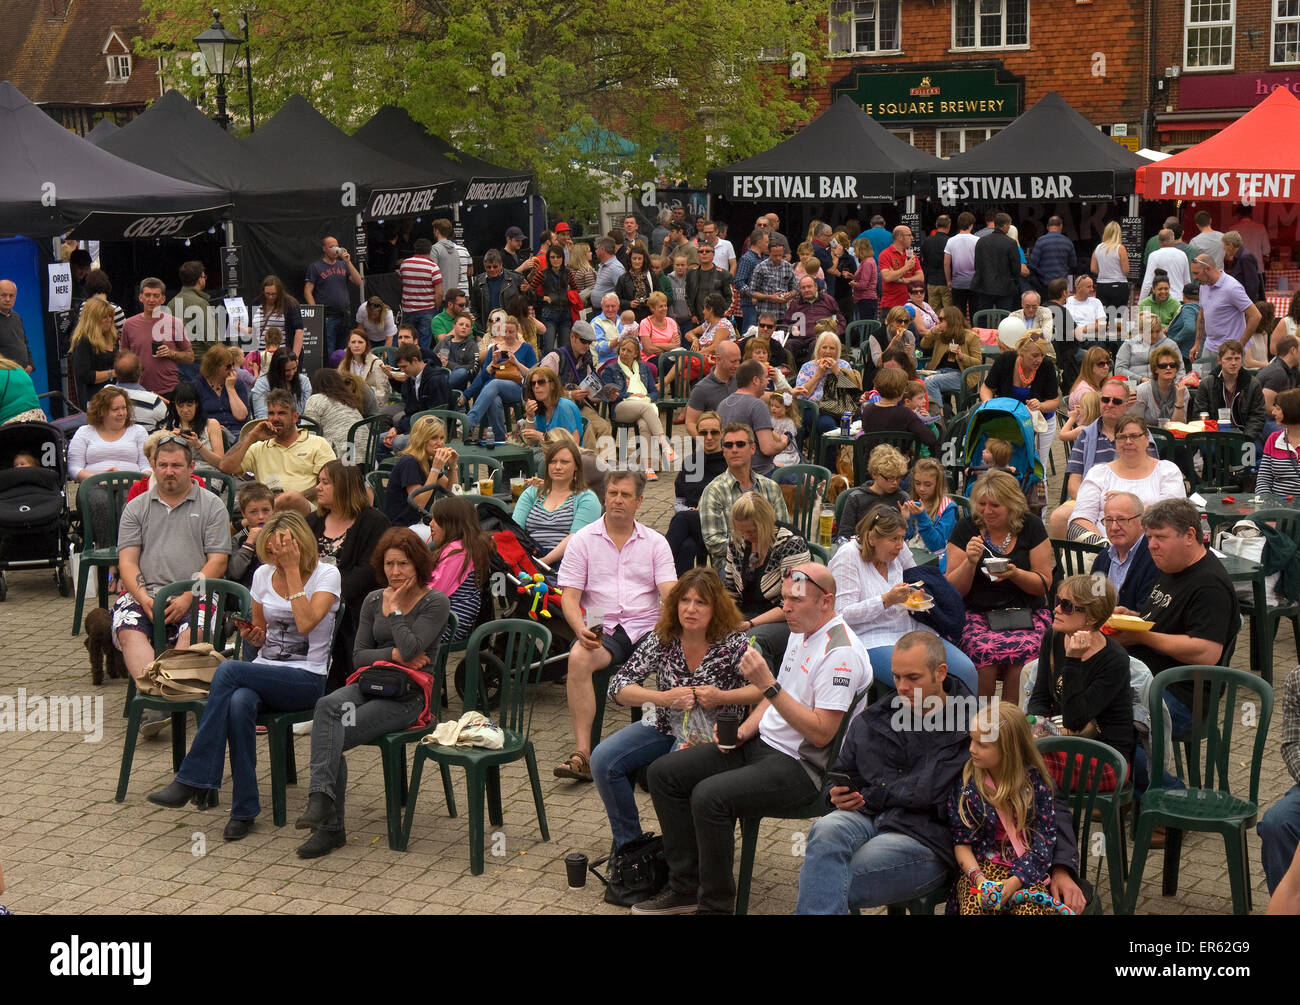 Crowds gatherd in The square for a day out at the Petersfield Spring Festival, Petersfield, Hampshire, UK. Stock Photo